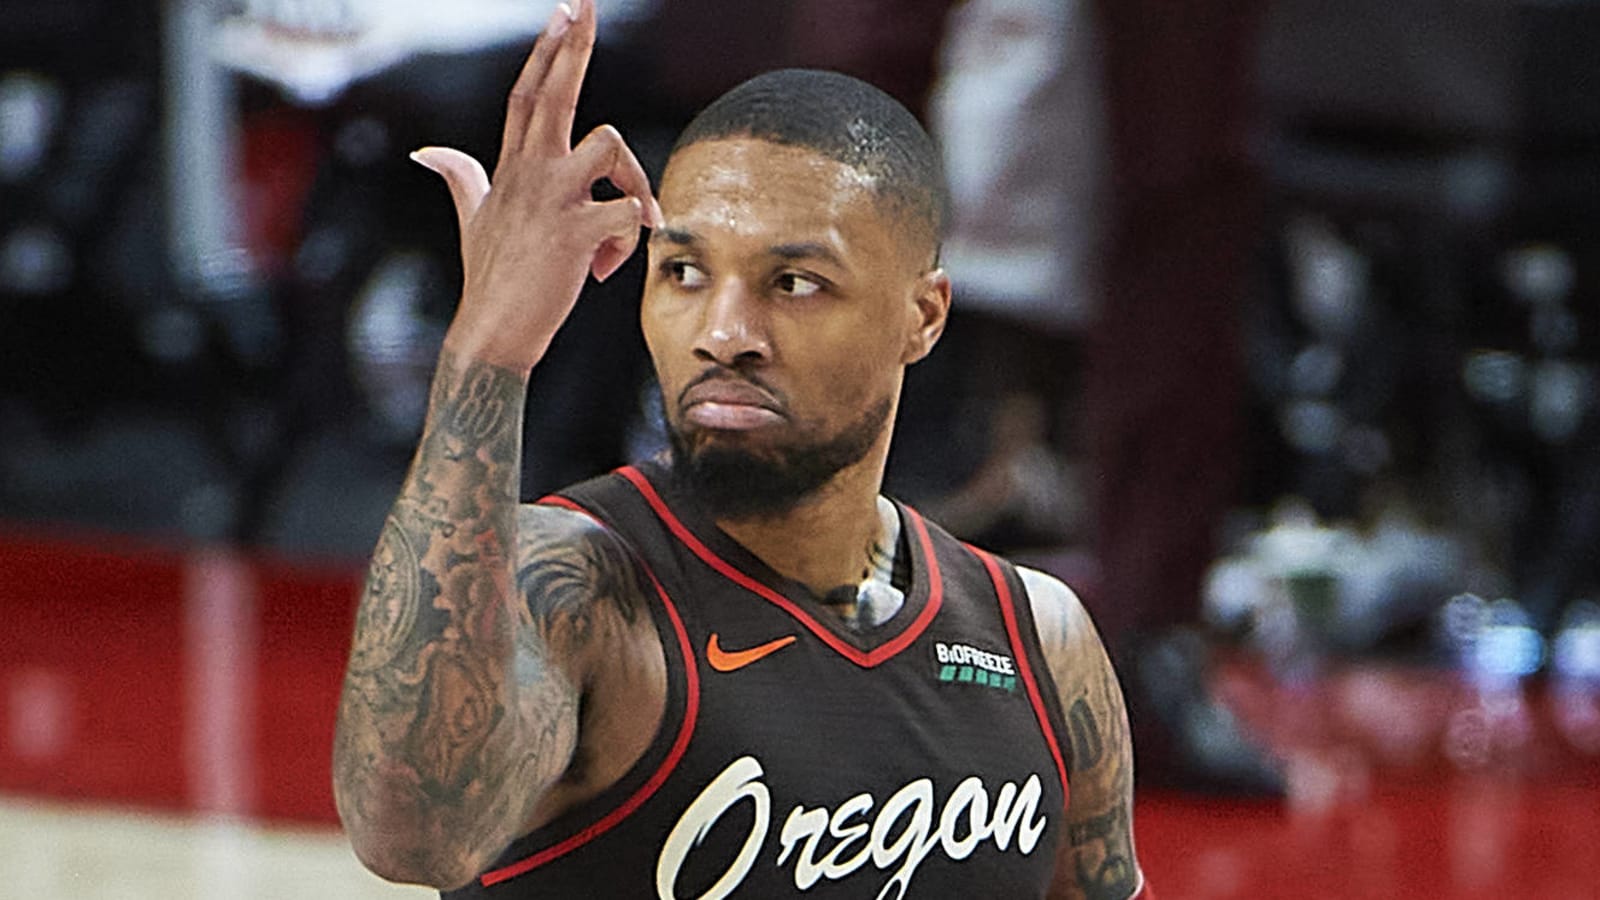 Blazers need roster overhaul around Damian Lillard after awful playoff exit